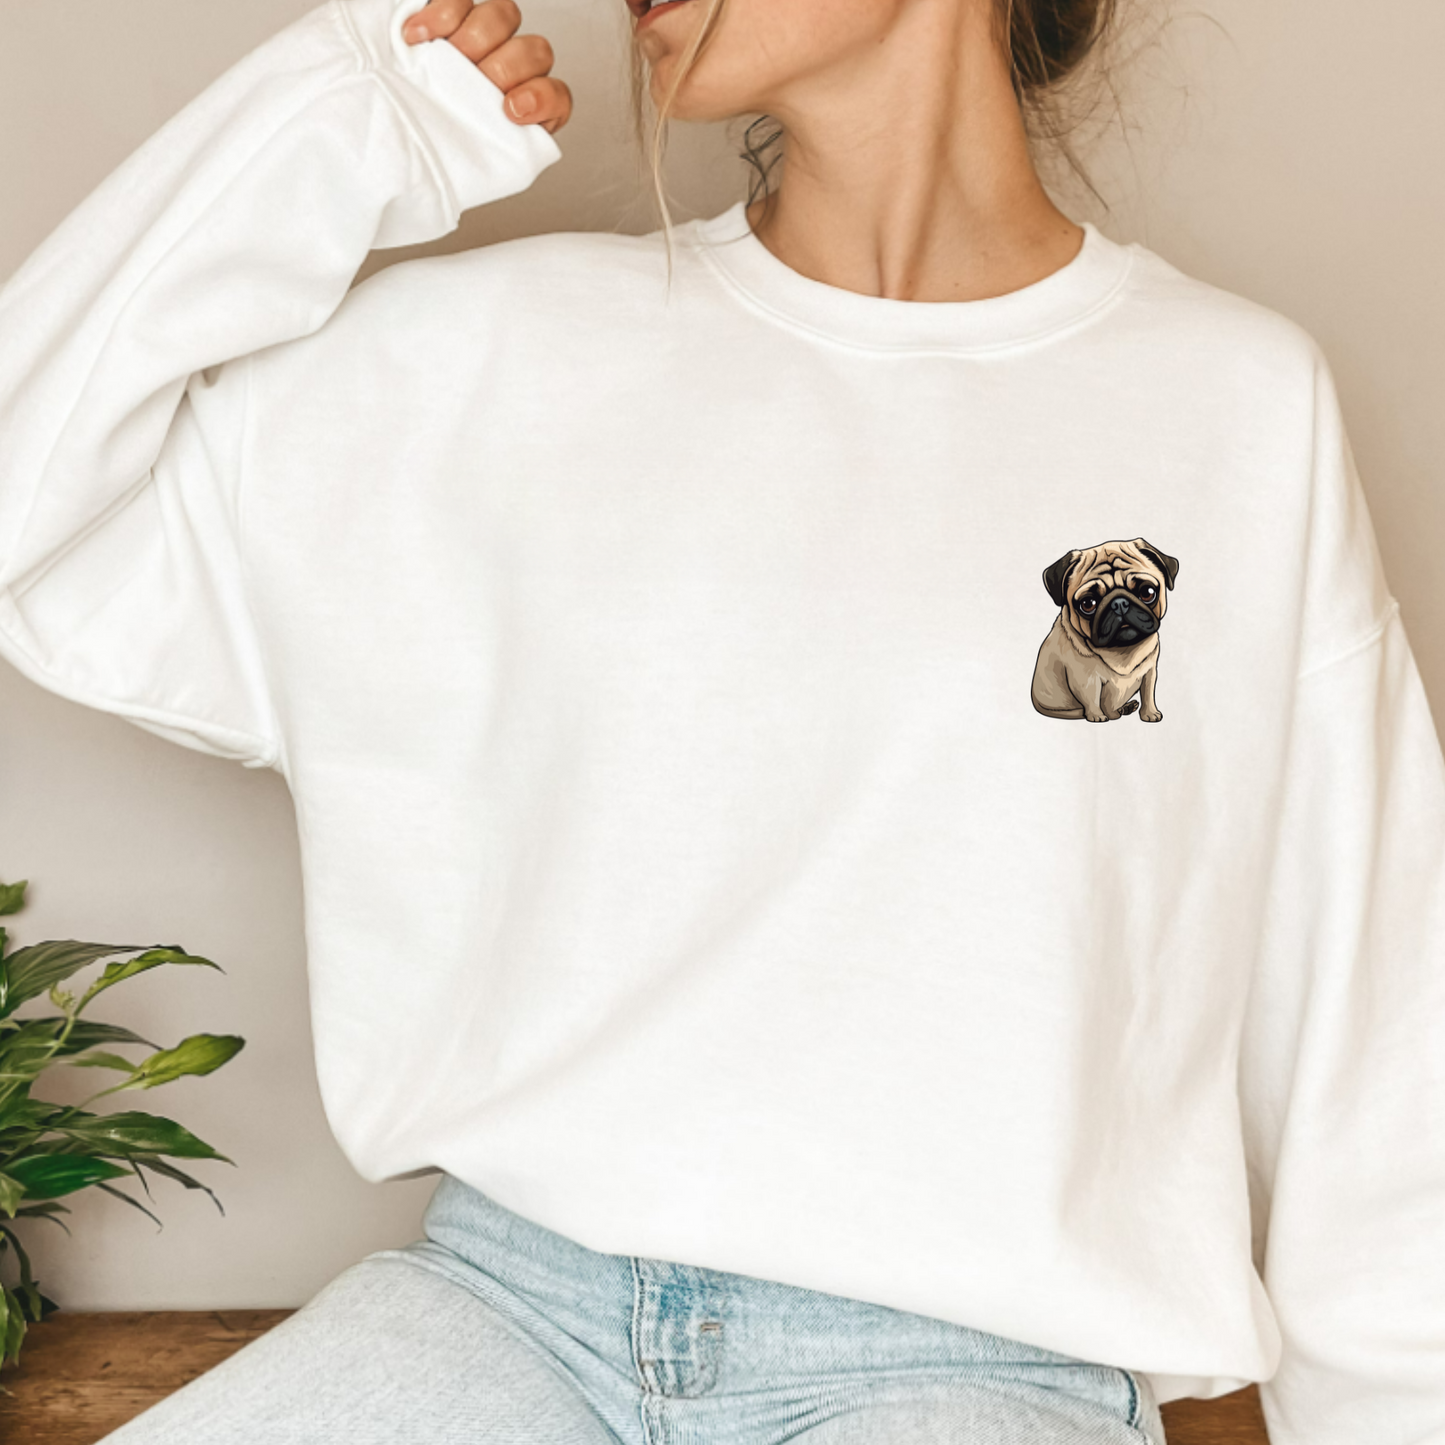 (Shirt not included) PUG POCKET - Clear Film Transfer